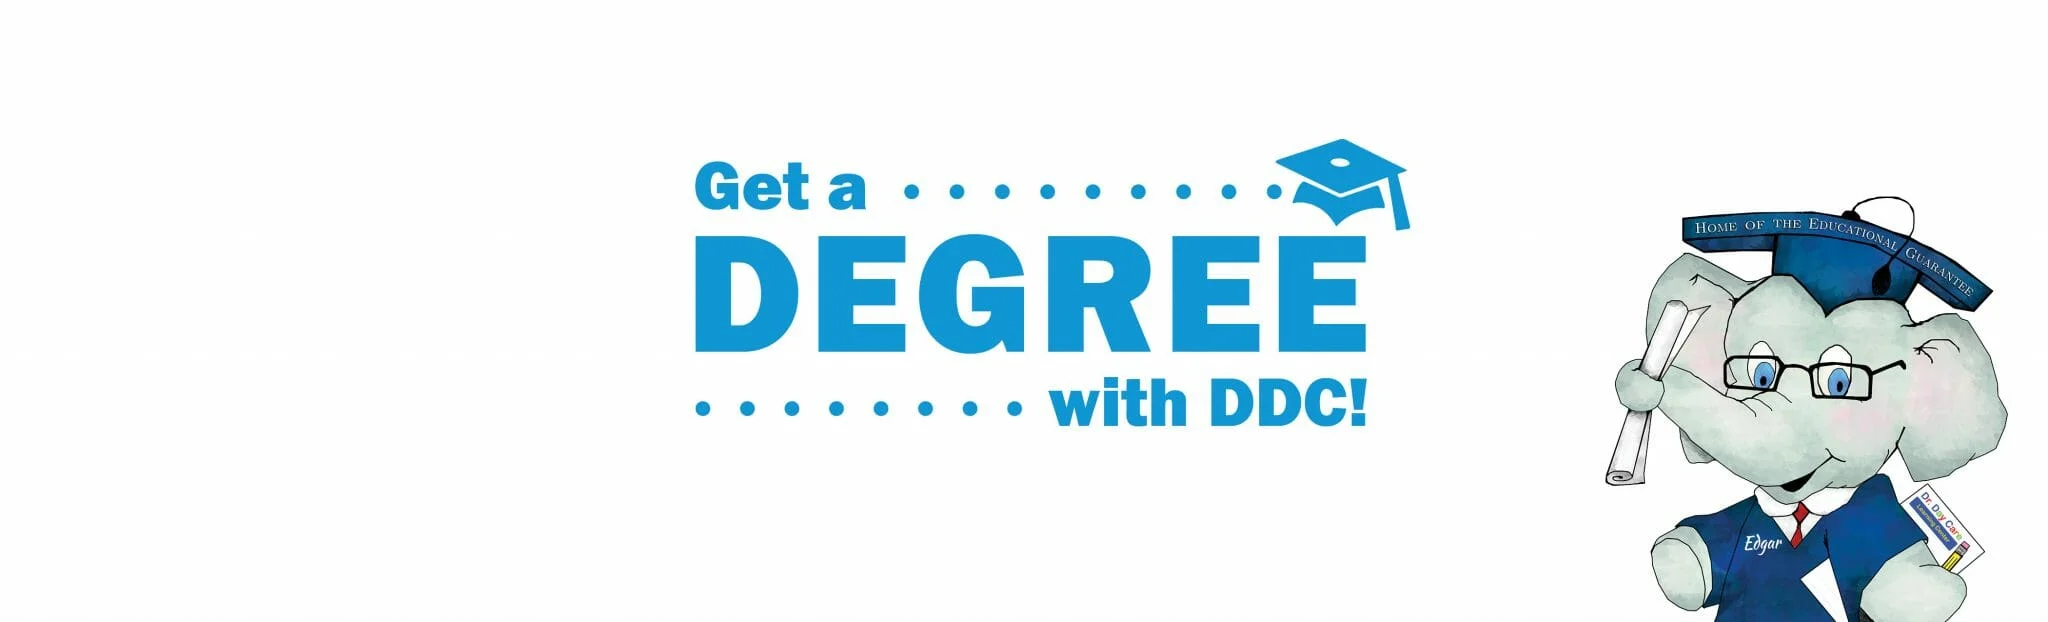 Get a Degree with DDC